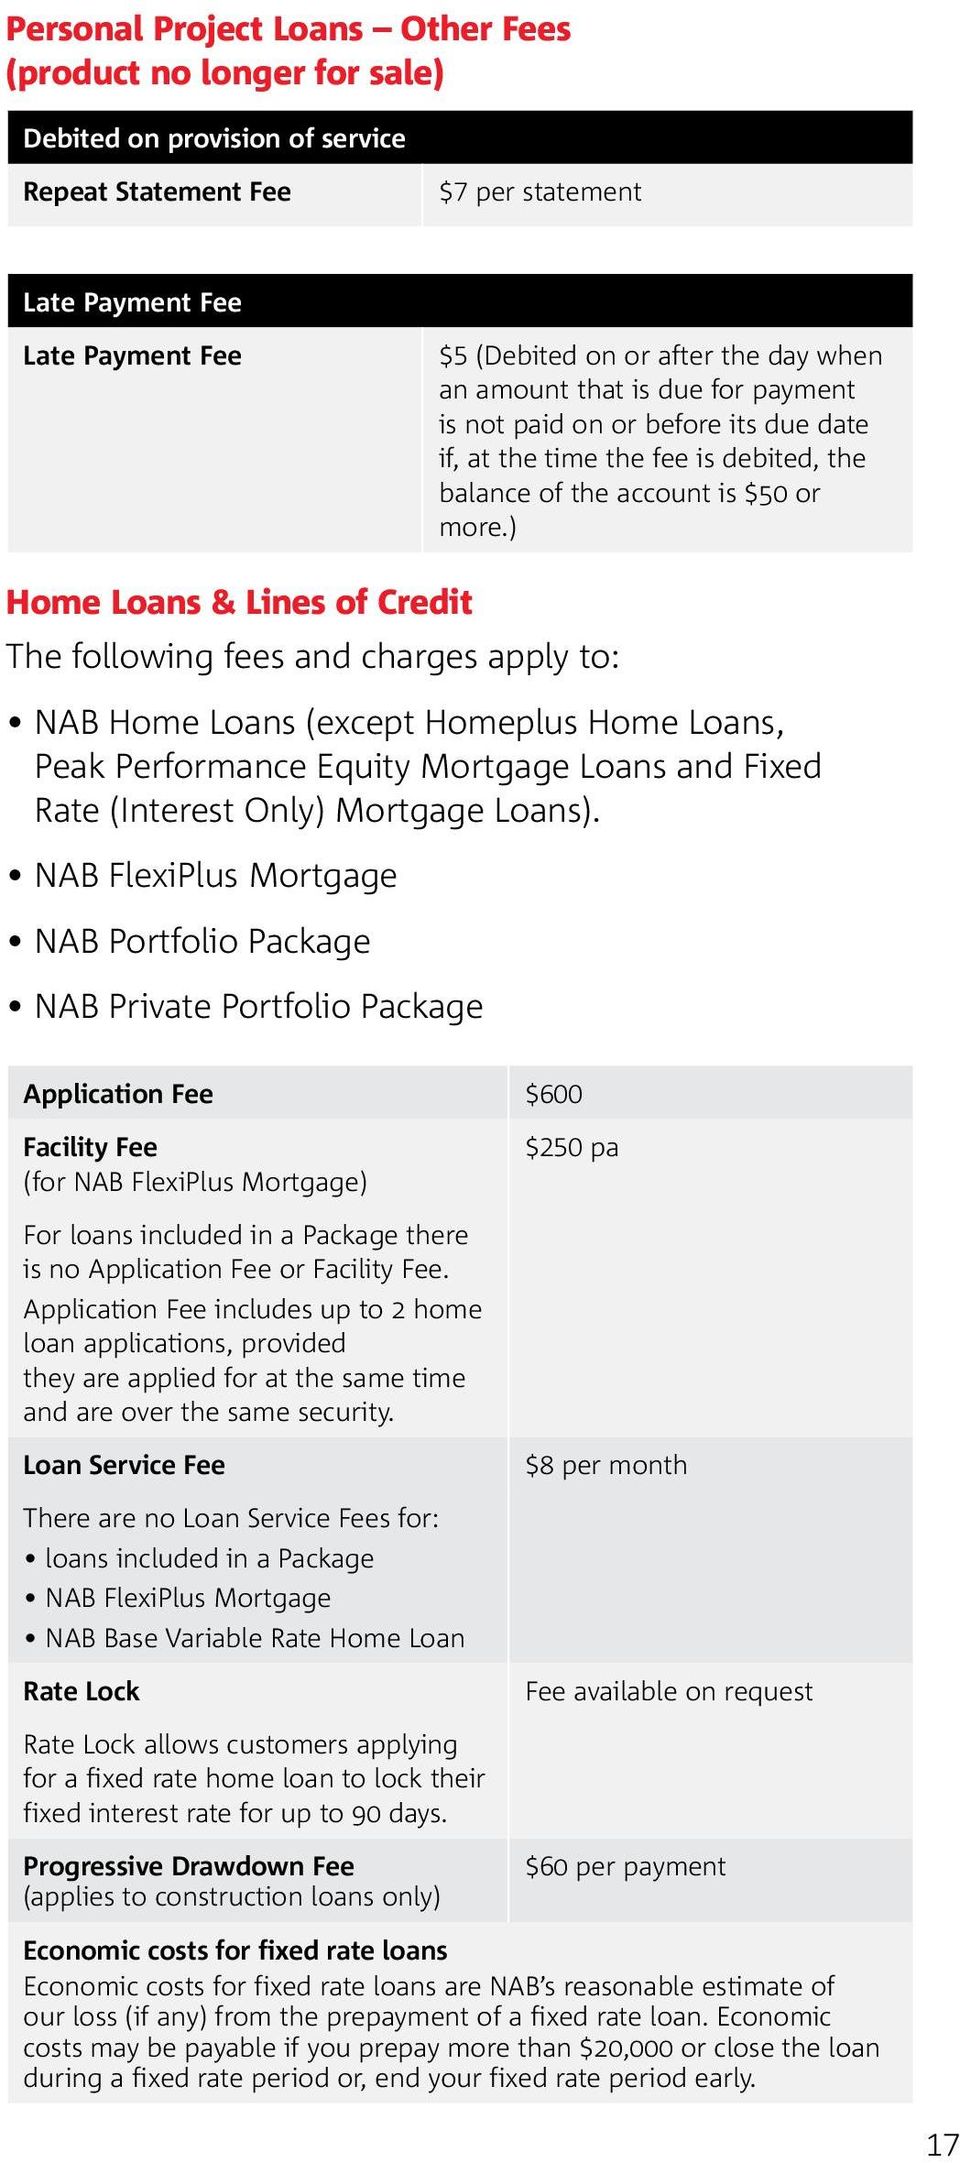 ) Home Loans & Lines of Credit The following fees and charges apply to: NAB Home Loans (except Homeplus Home Loans, Peak Performance Equity Mortgage Loans and Fixed Rate (Interest Only) Mortgage